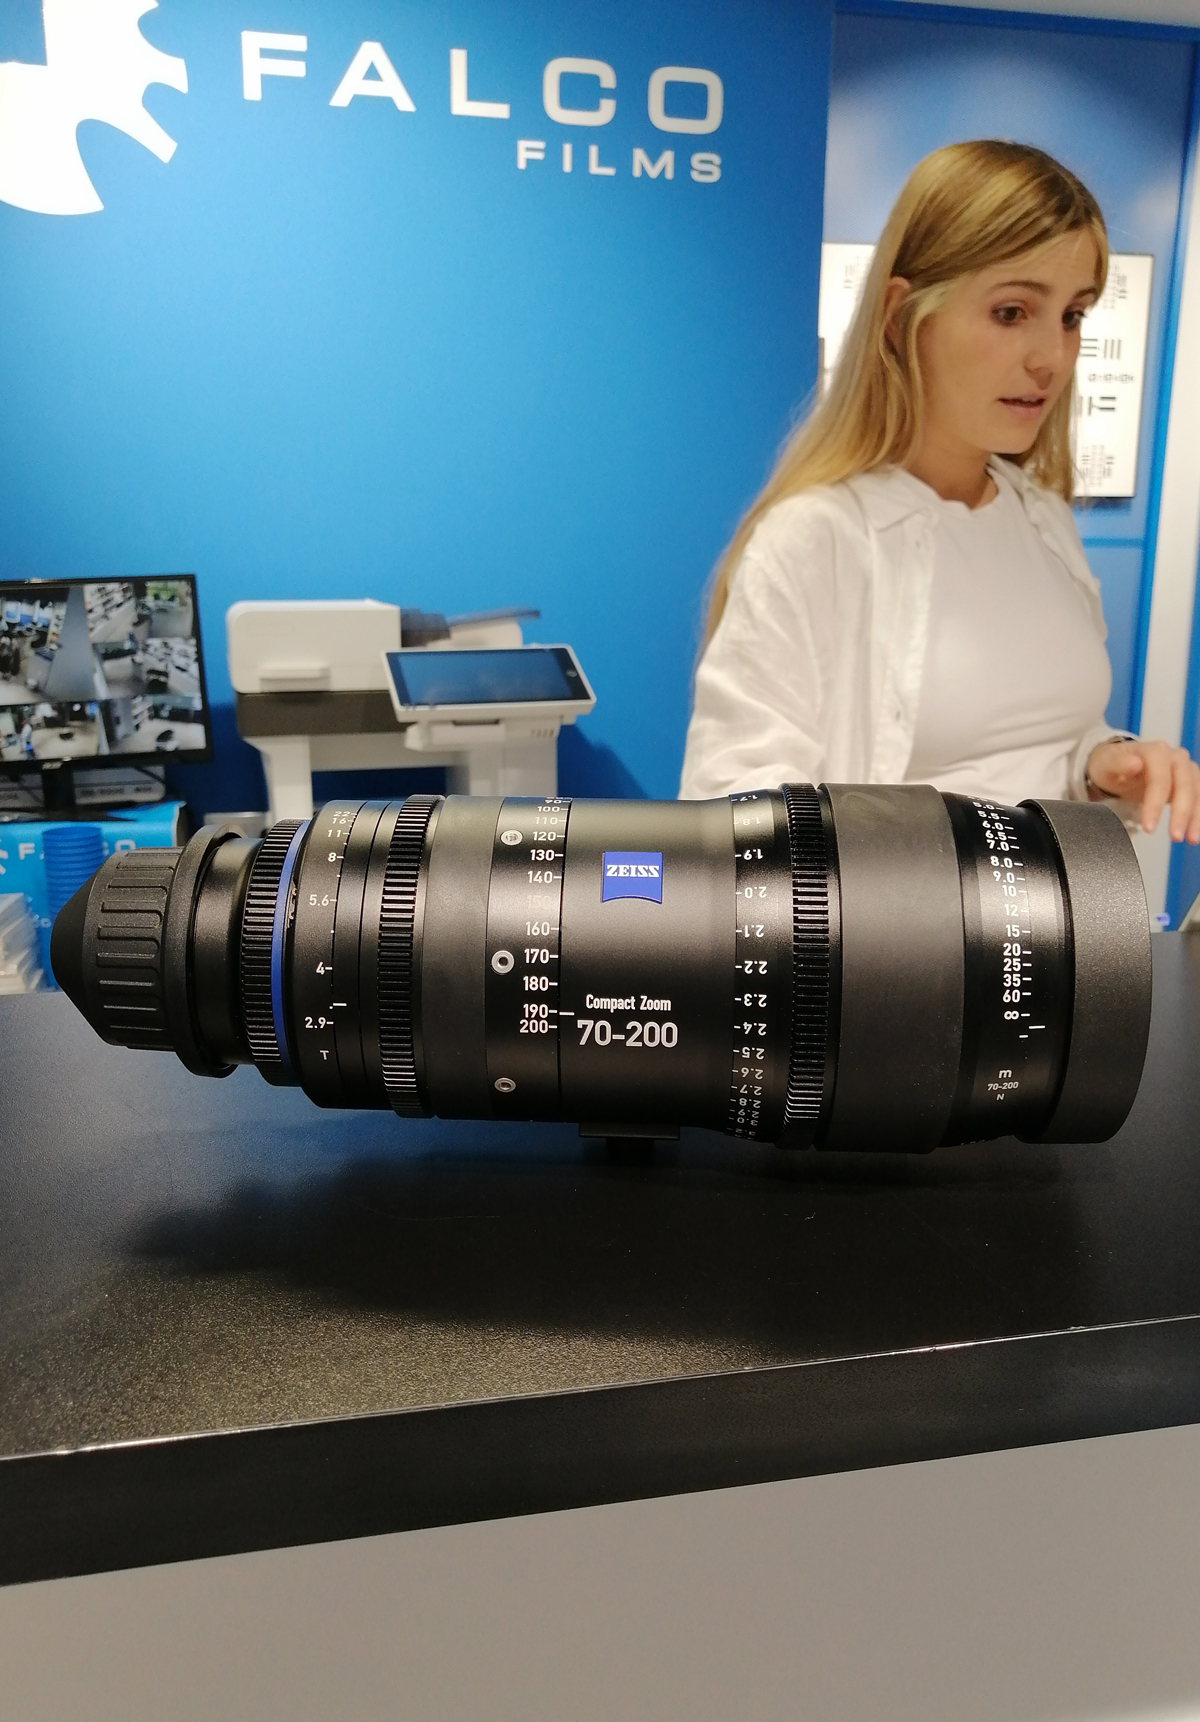 ZEISS COMPACT ZOOM CZ.2 70-200 T2.9